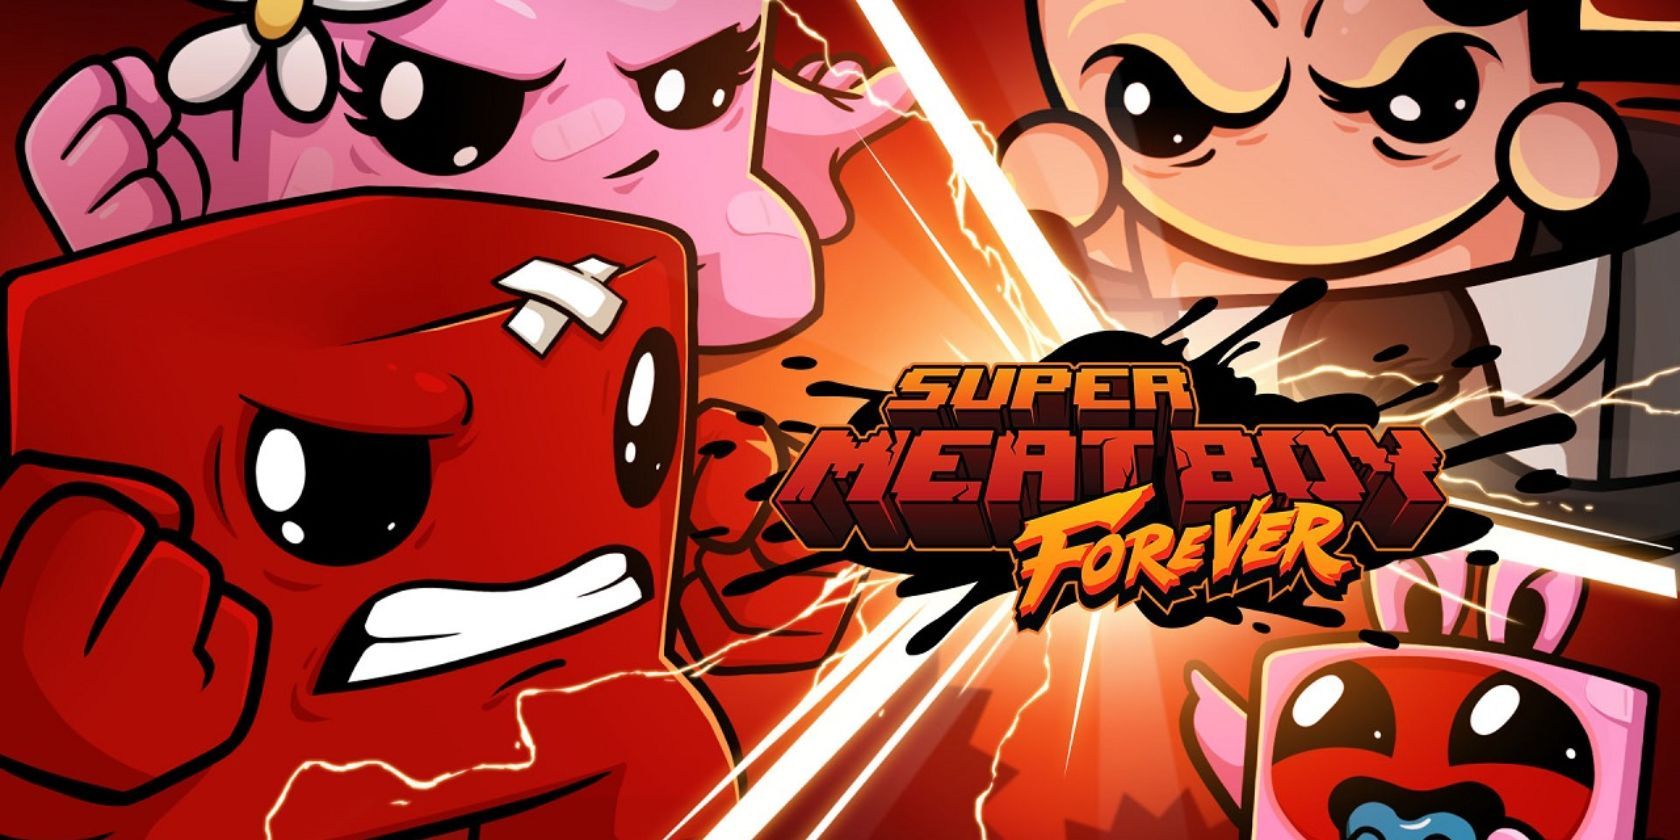 Super Meat Boy Forever finally has a release date for Android, six year after it was announced